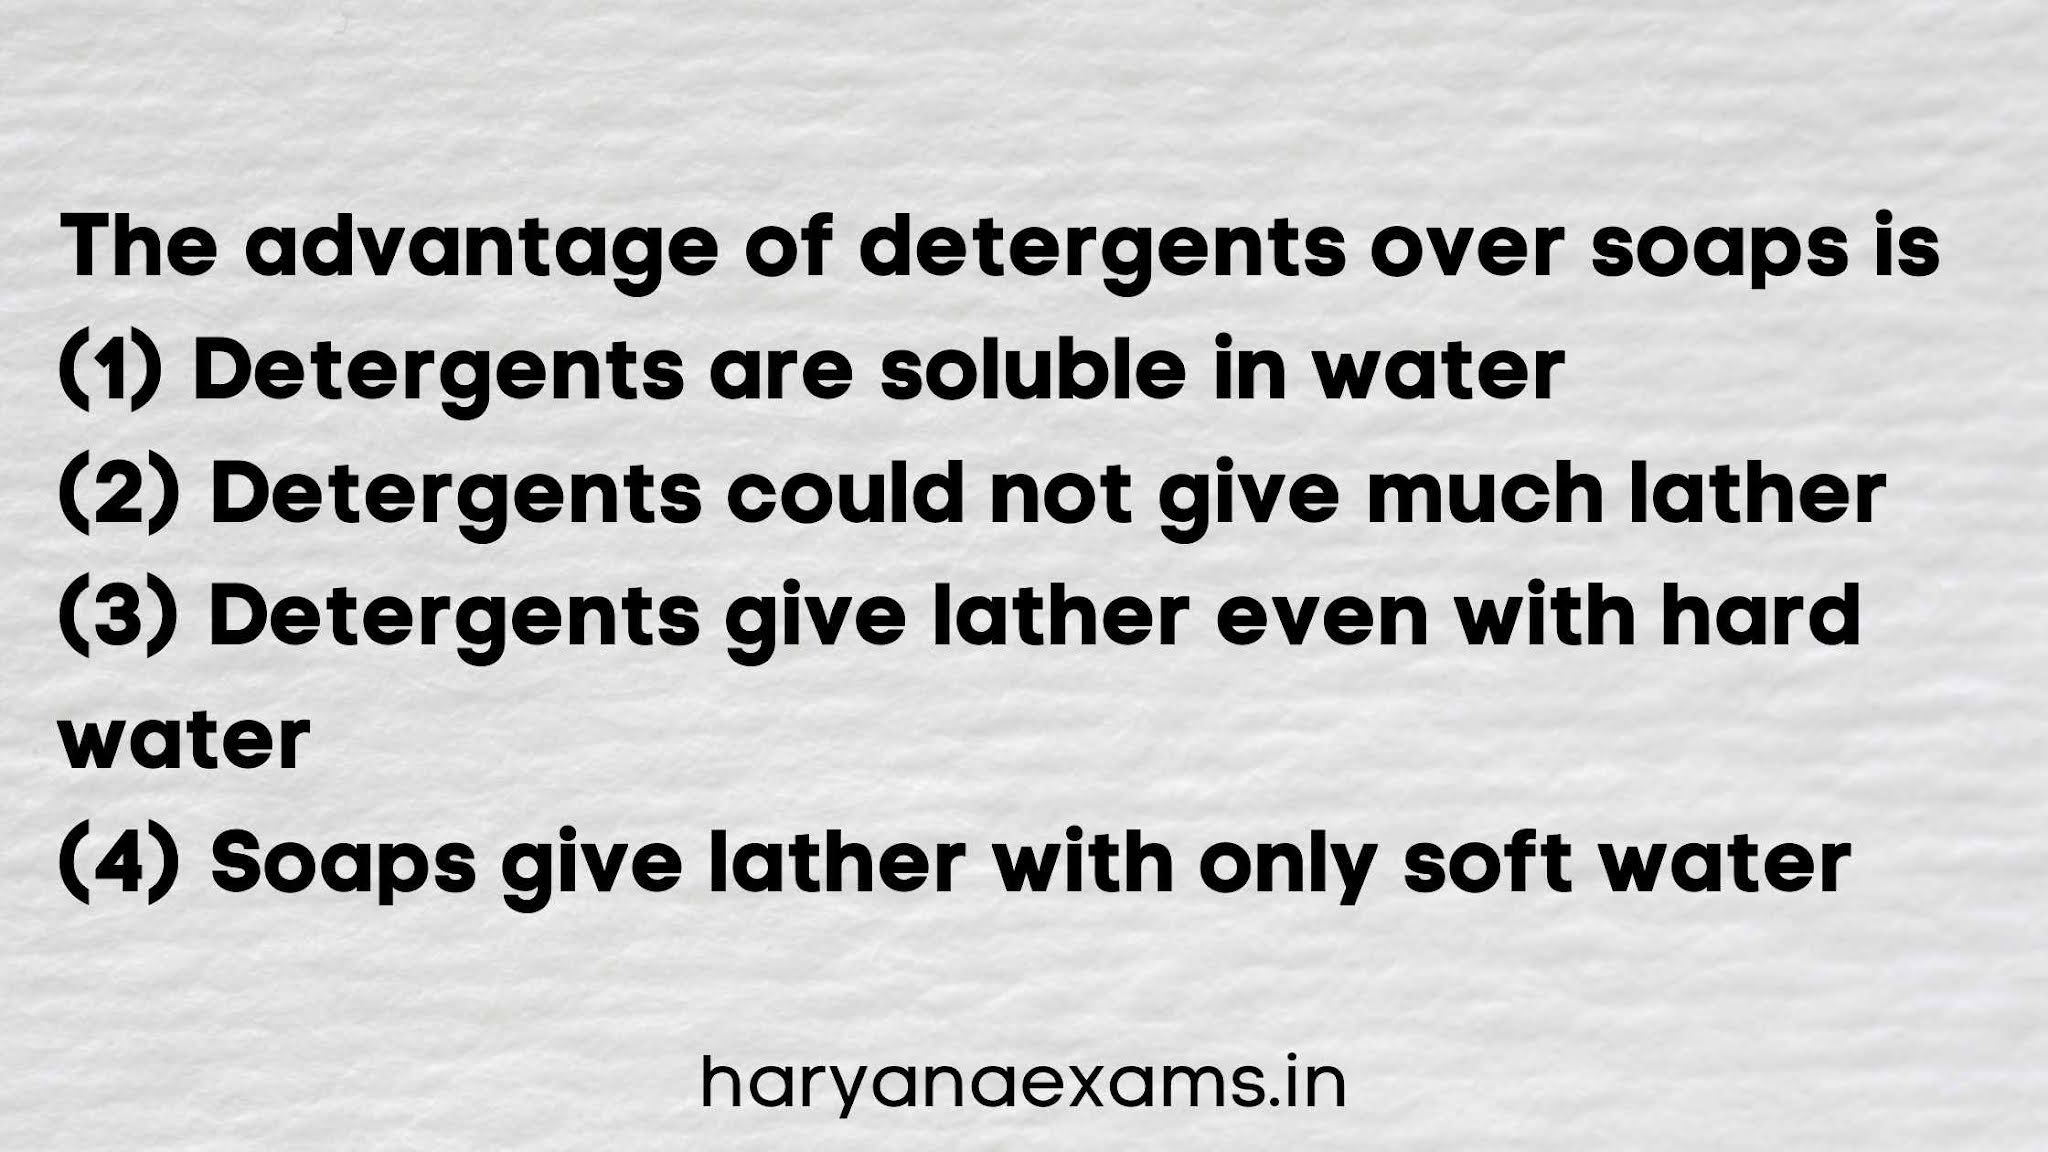 The advantage of detergents over soaps is   (1) Detergents are soluble in water   (2) Detergents could not give much lather   (3) Detergents give lather even with hard water   (4) Soaps give lather with only soft water